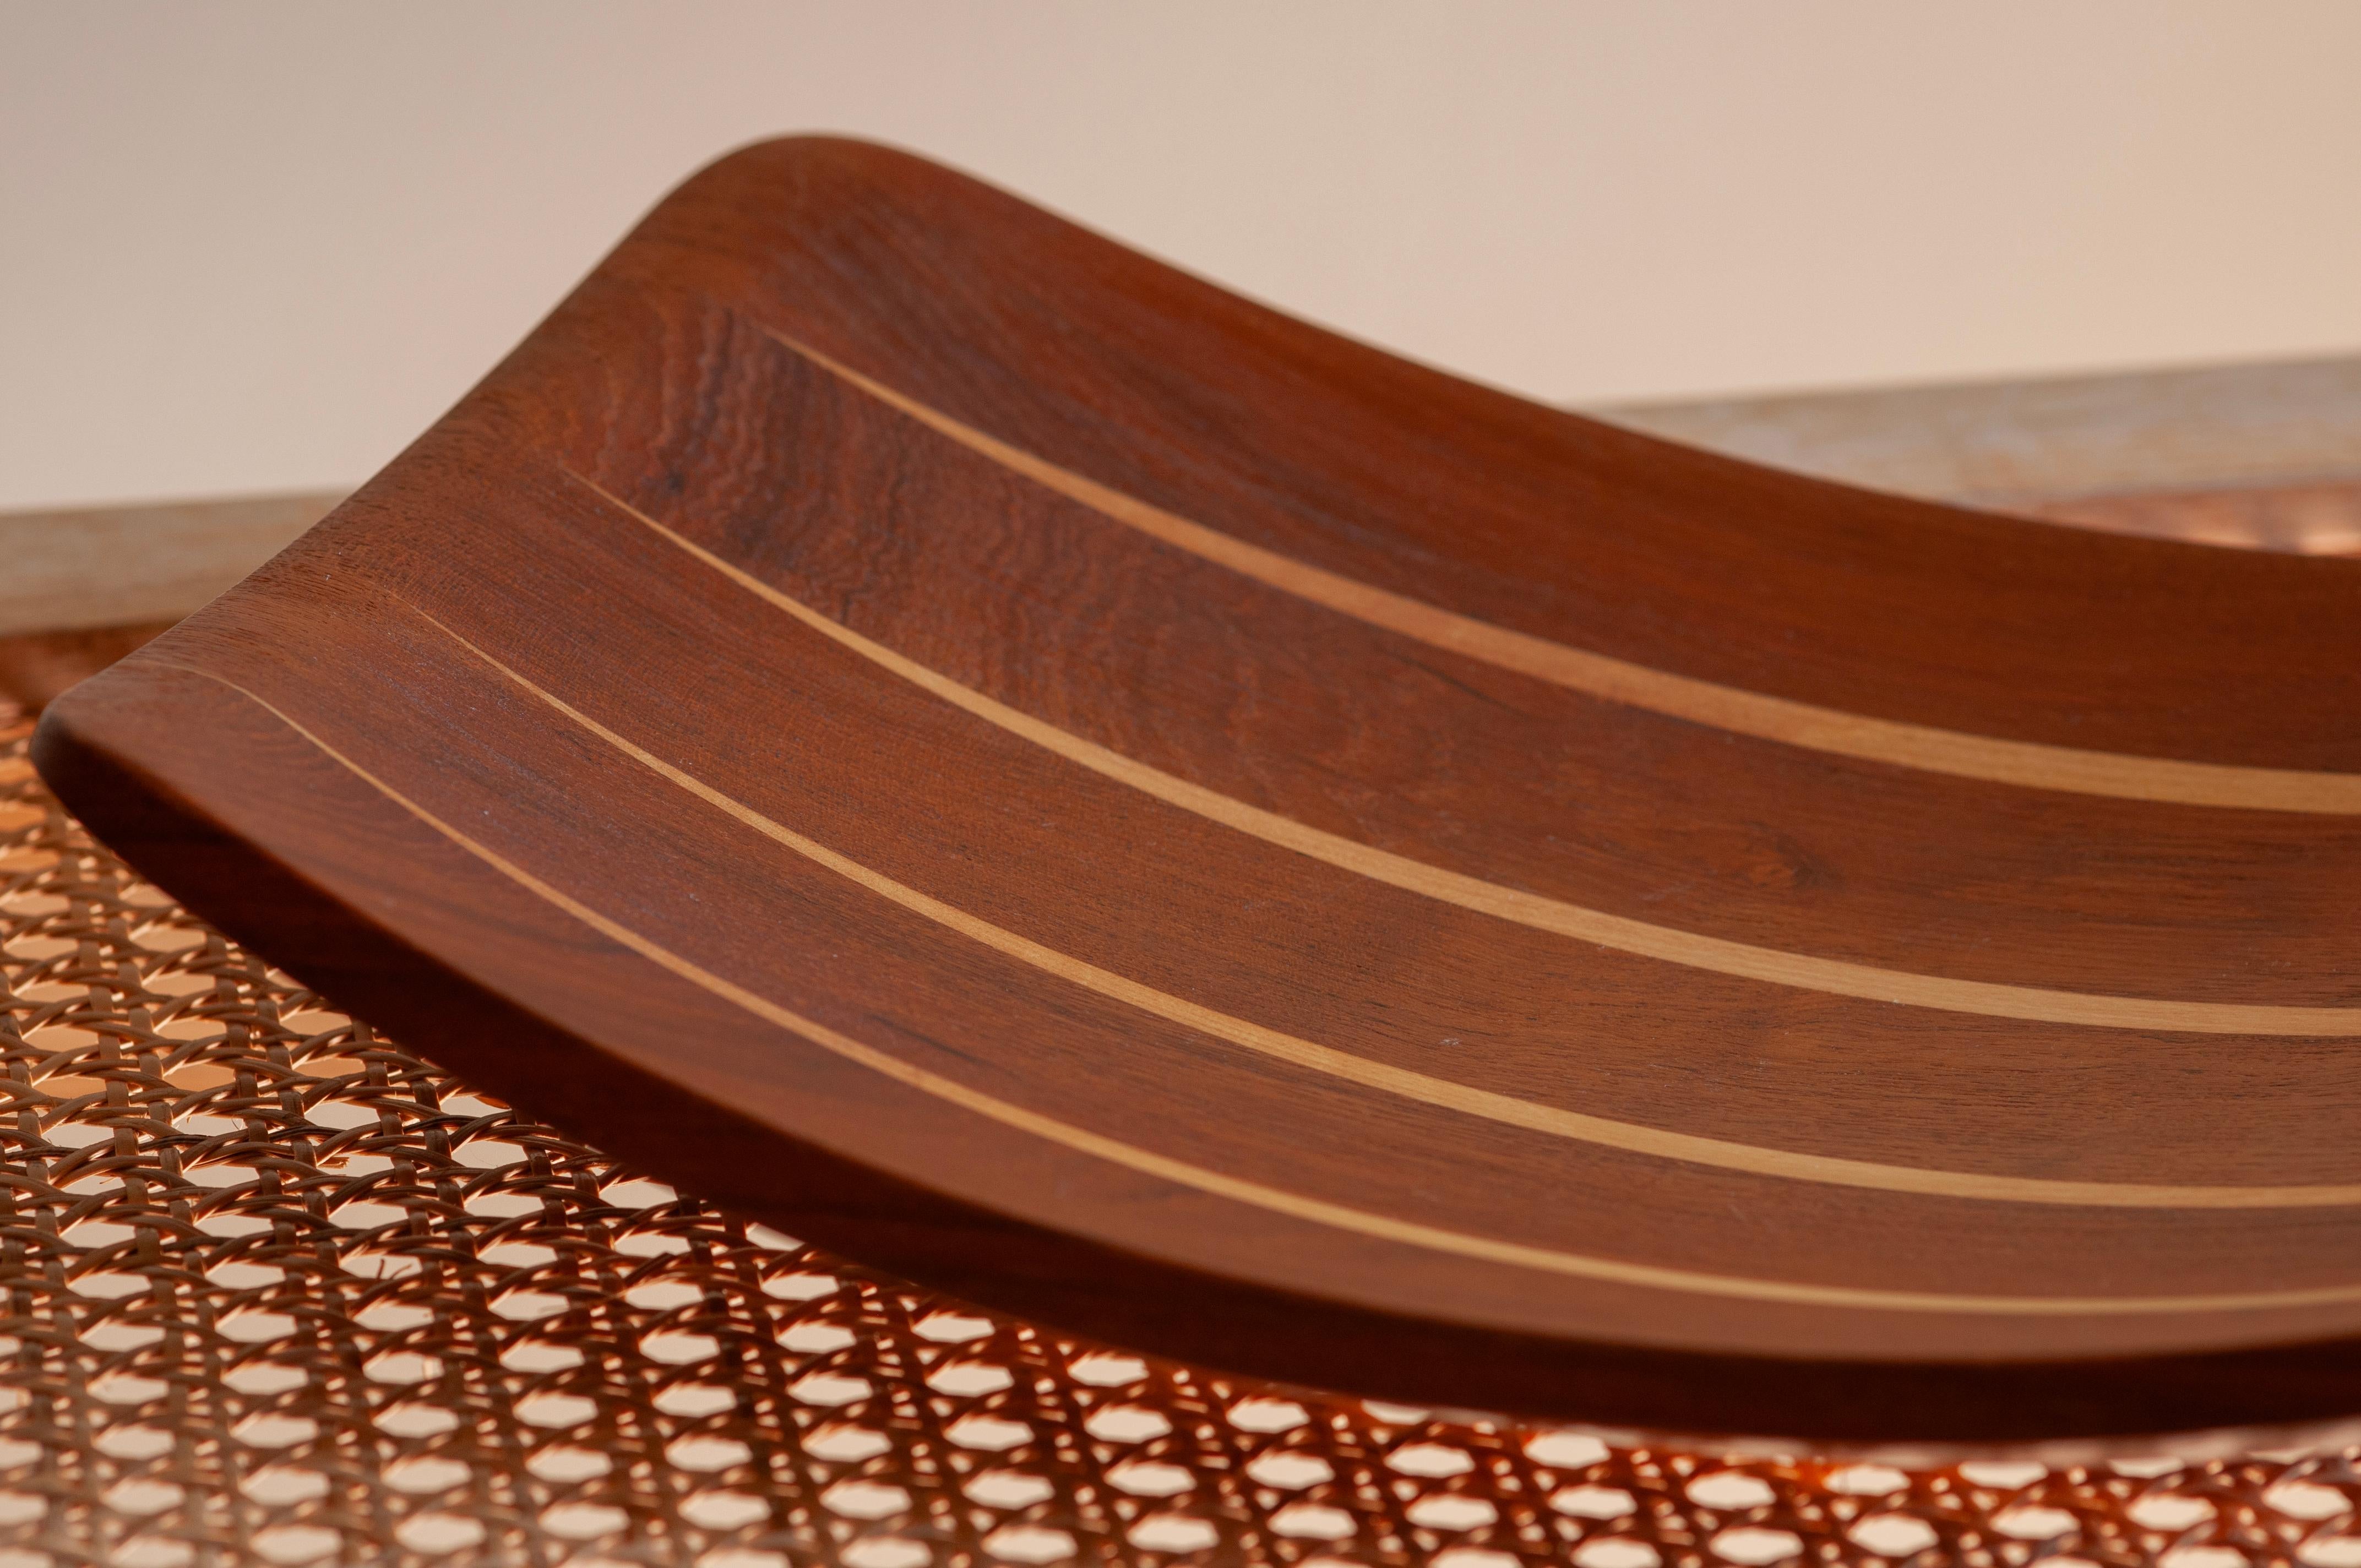 Norwegian Teak tray with birch details by Arne Tidemand Ruud For Sale